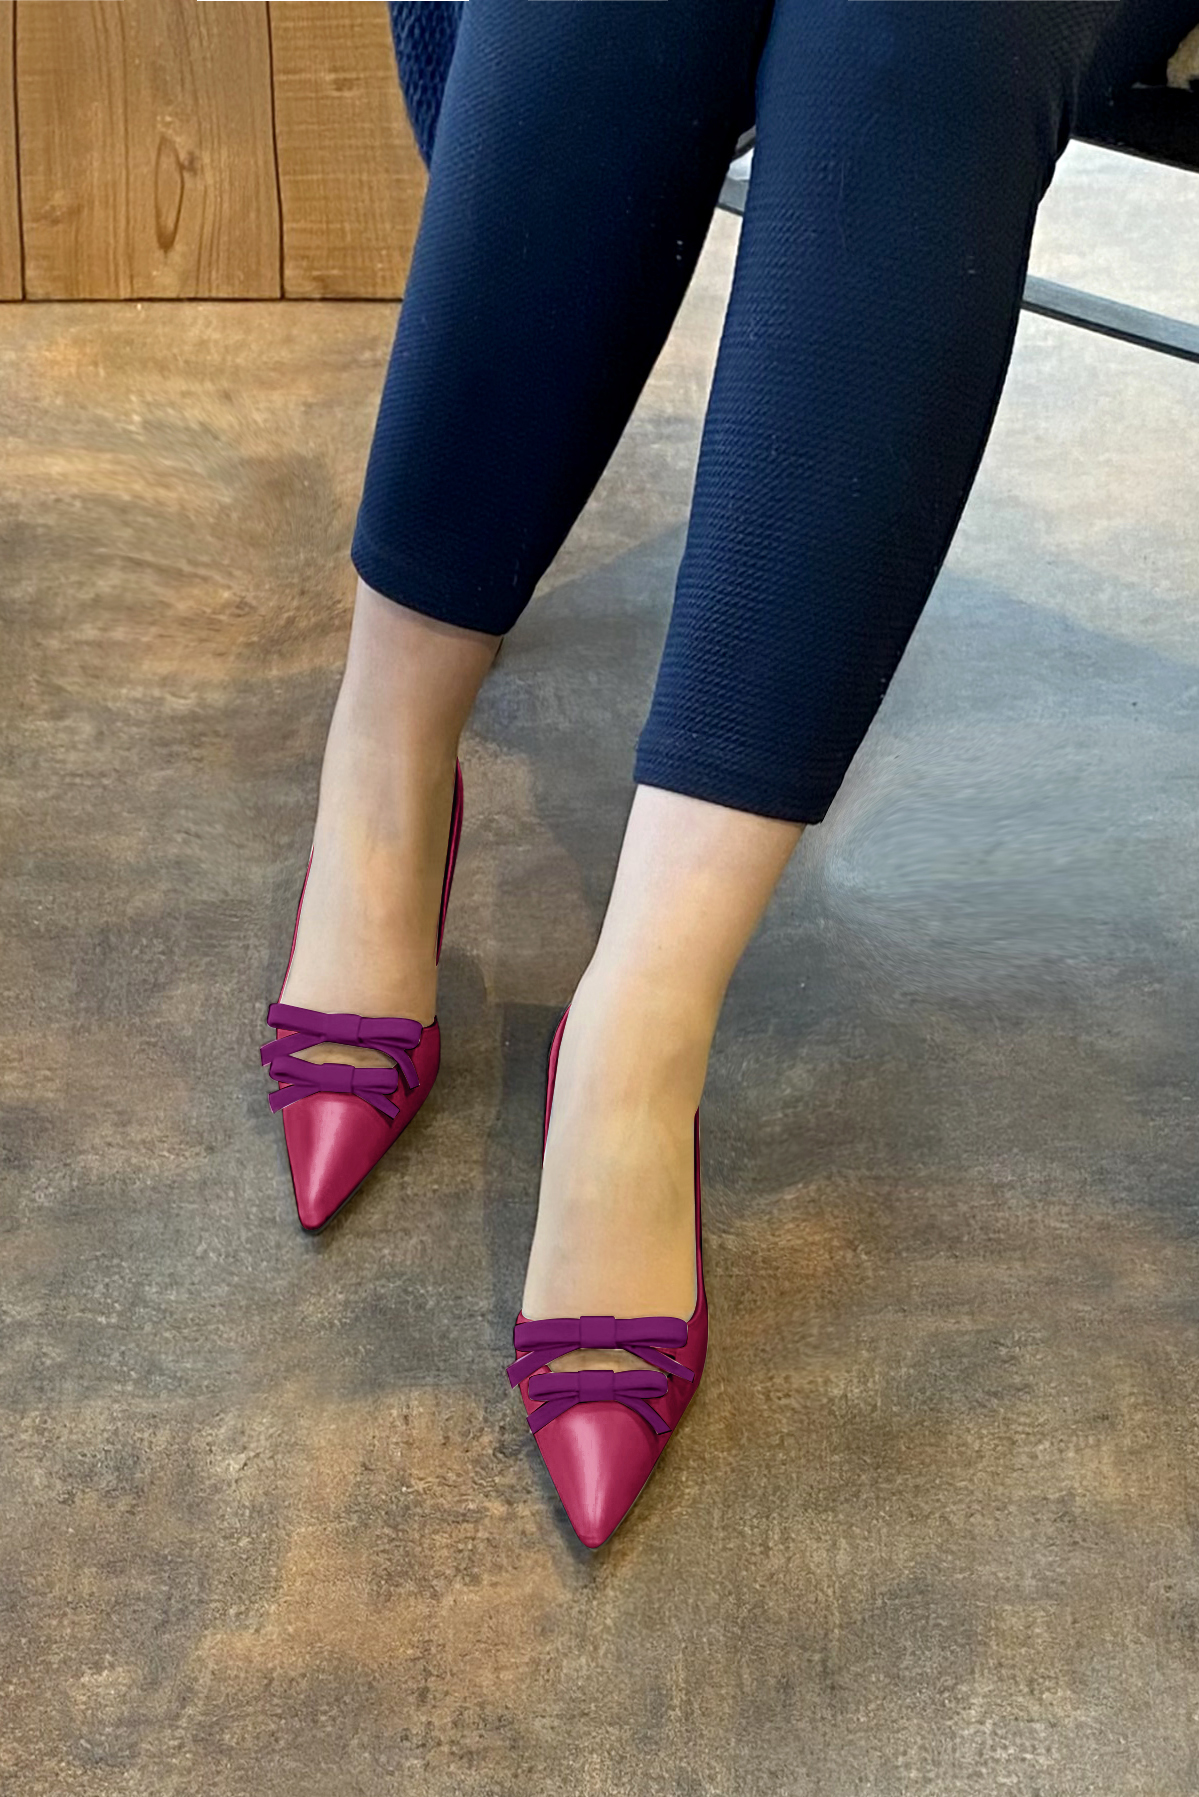 Fuschia pink and mulberry purple women's open back shoes, with a knot. Pointed toe. High slim heel. Worn view - Florence KOOIJMAN